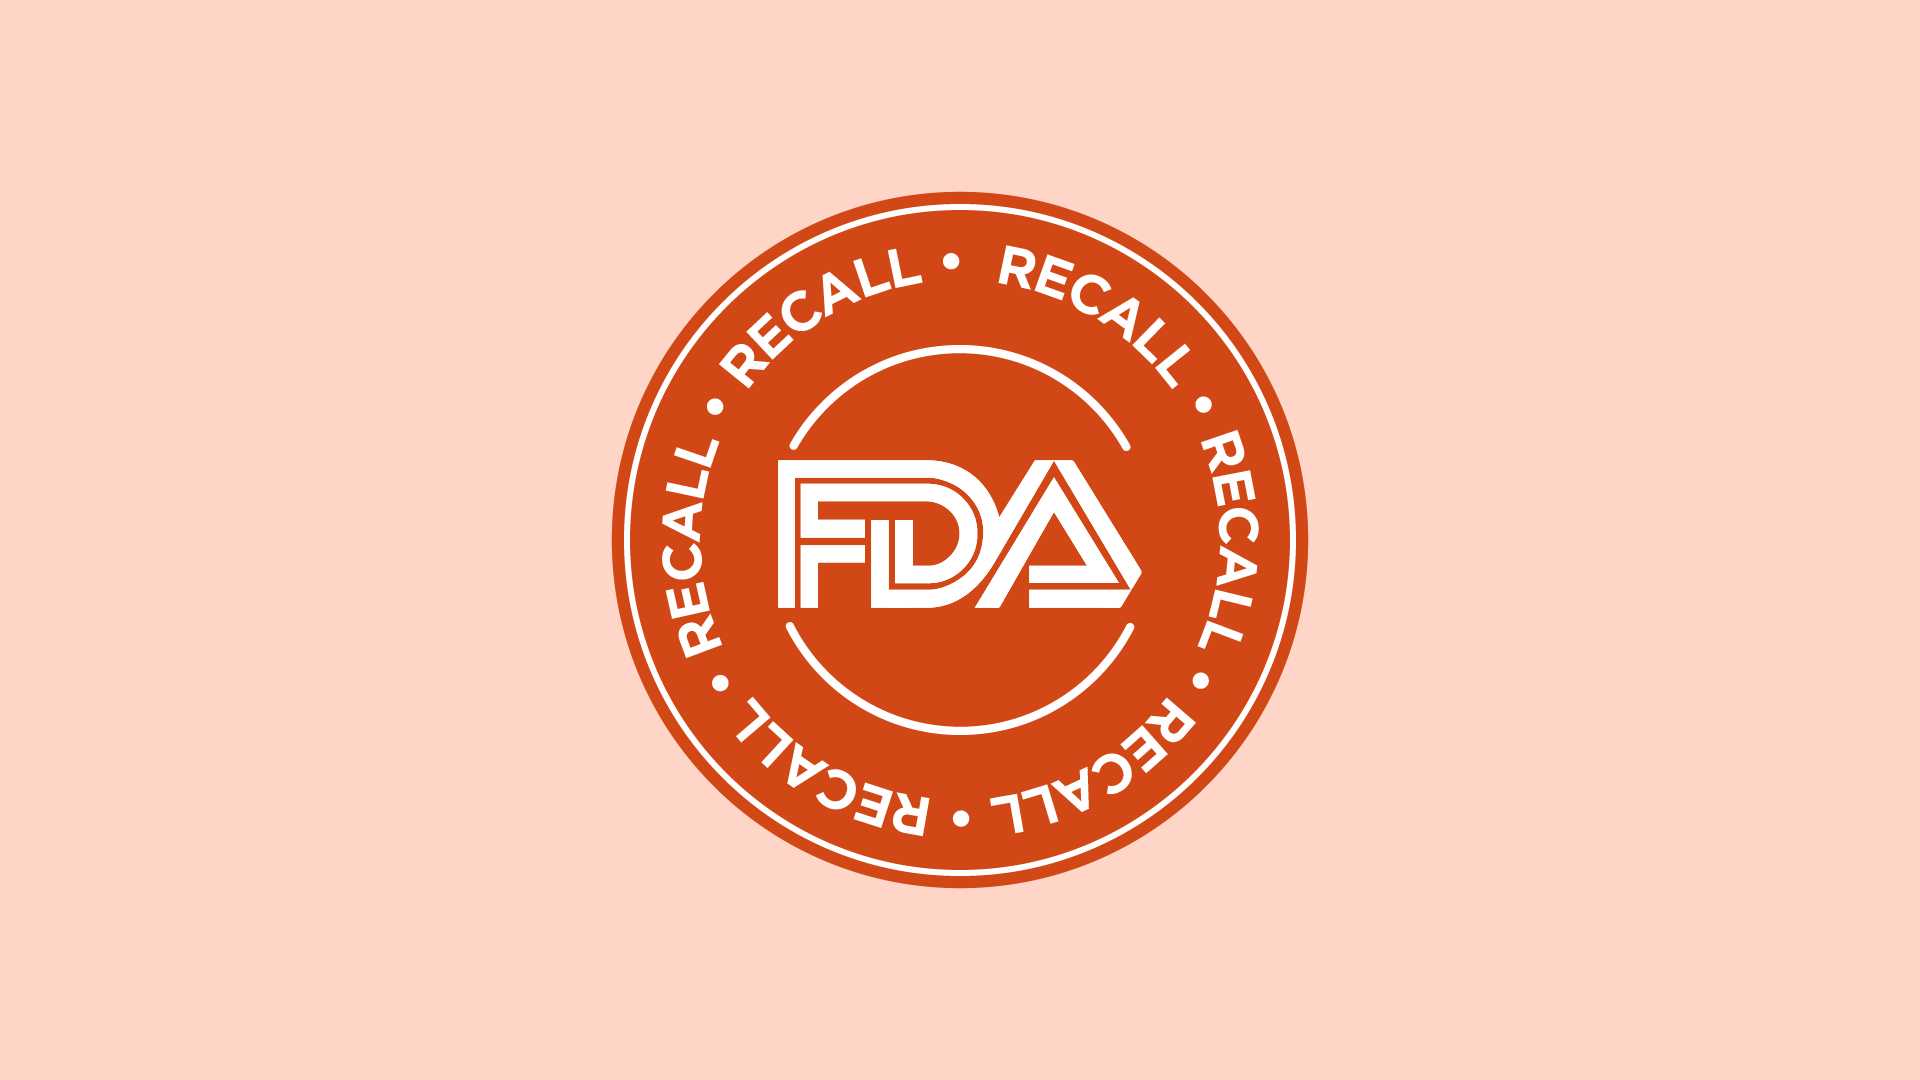 Generic Prozac Recalled Due to Abnormal Testing Results - GoodRx